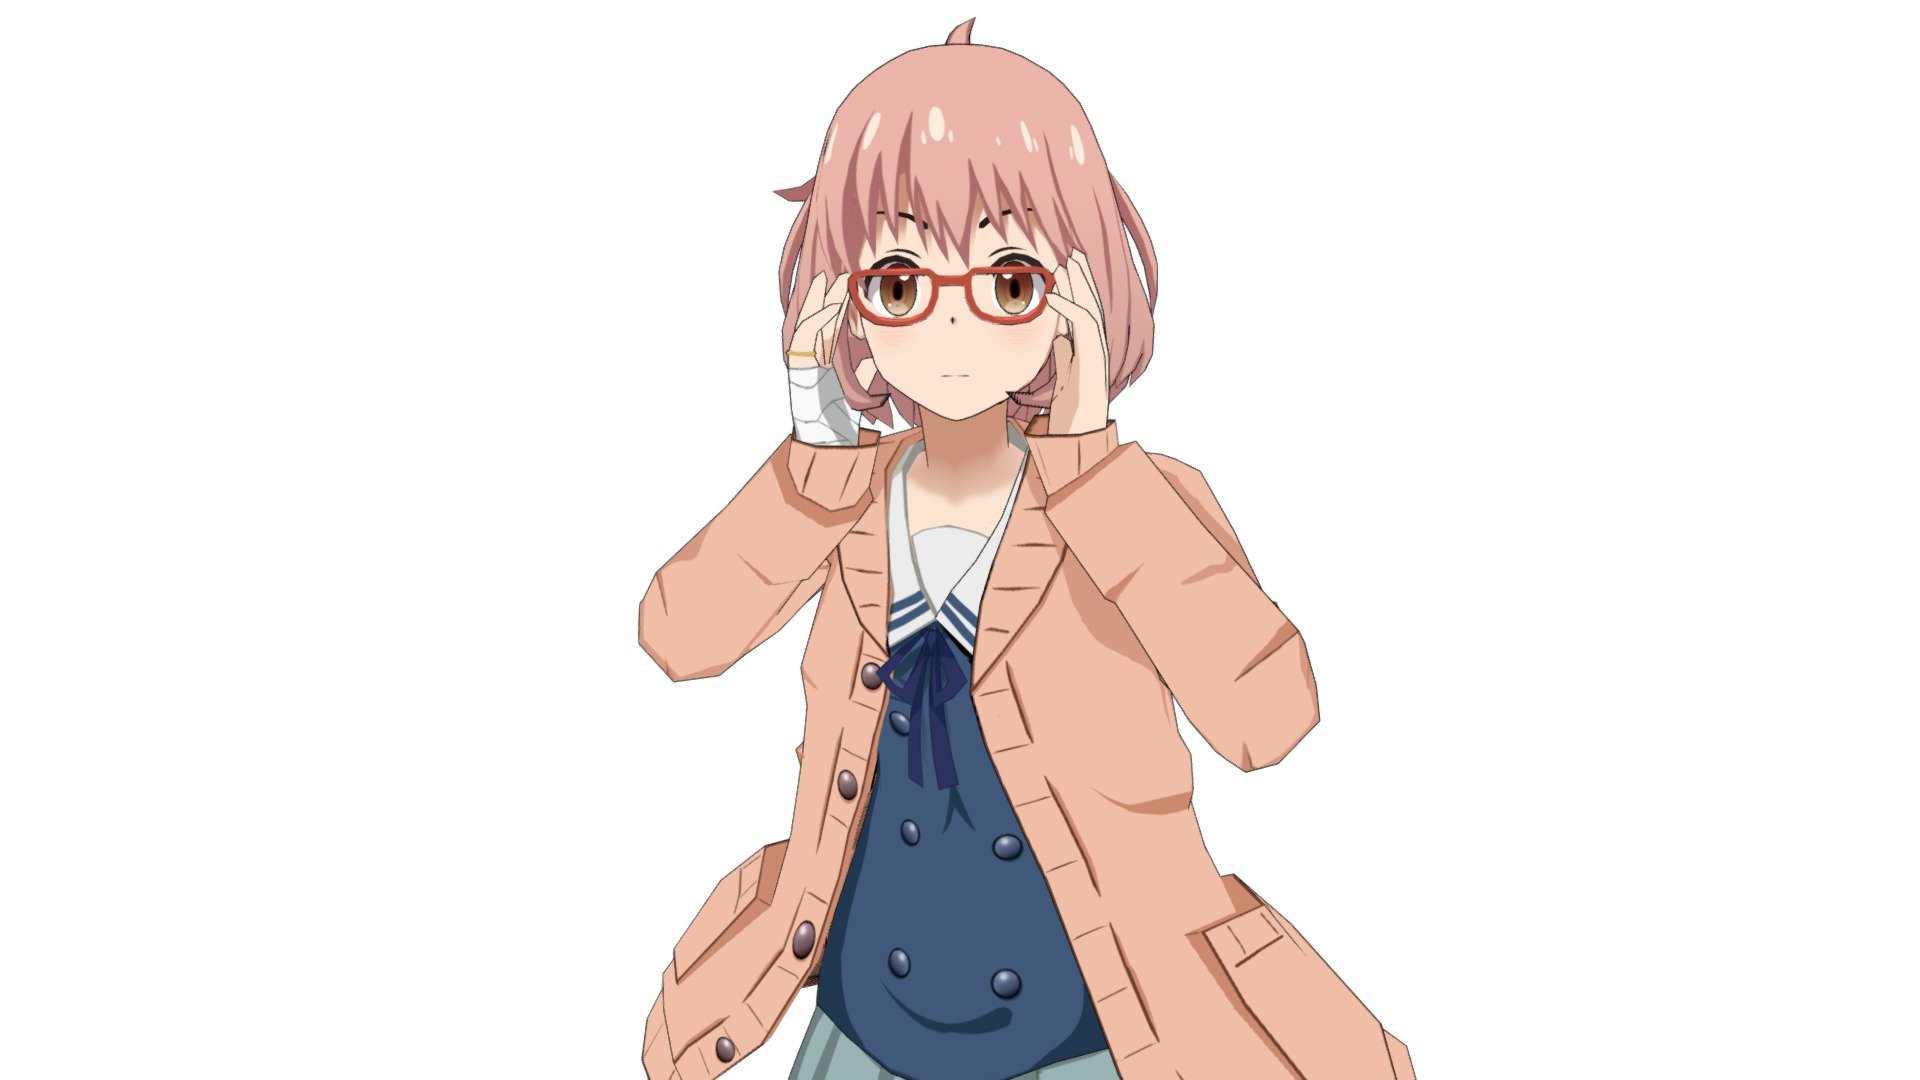 FREE DOWNLOAD Beyond The Boundary Mirai Kuriyama PNG HD PxPNG Images With  Transparent Background To Download For Free